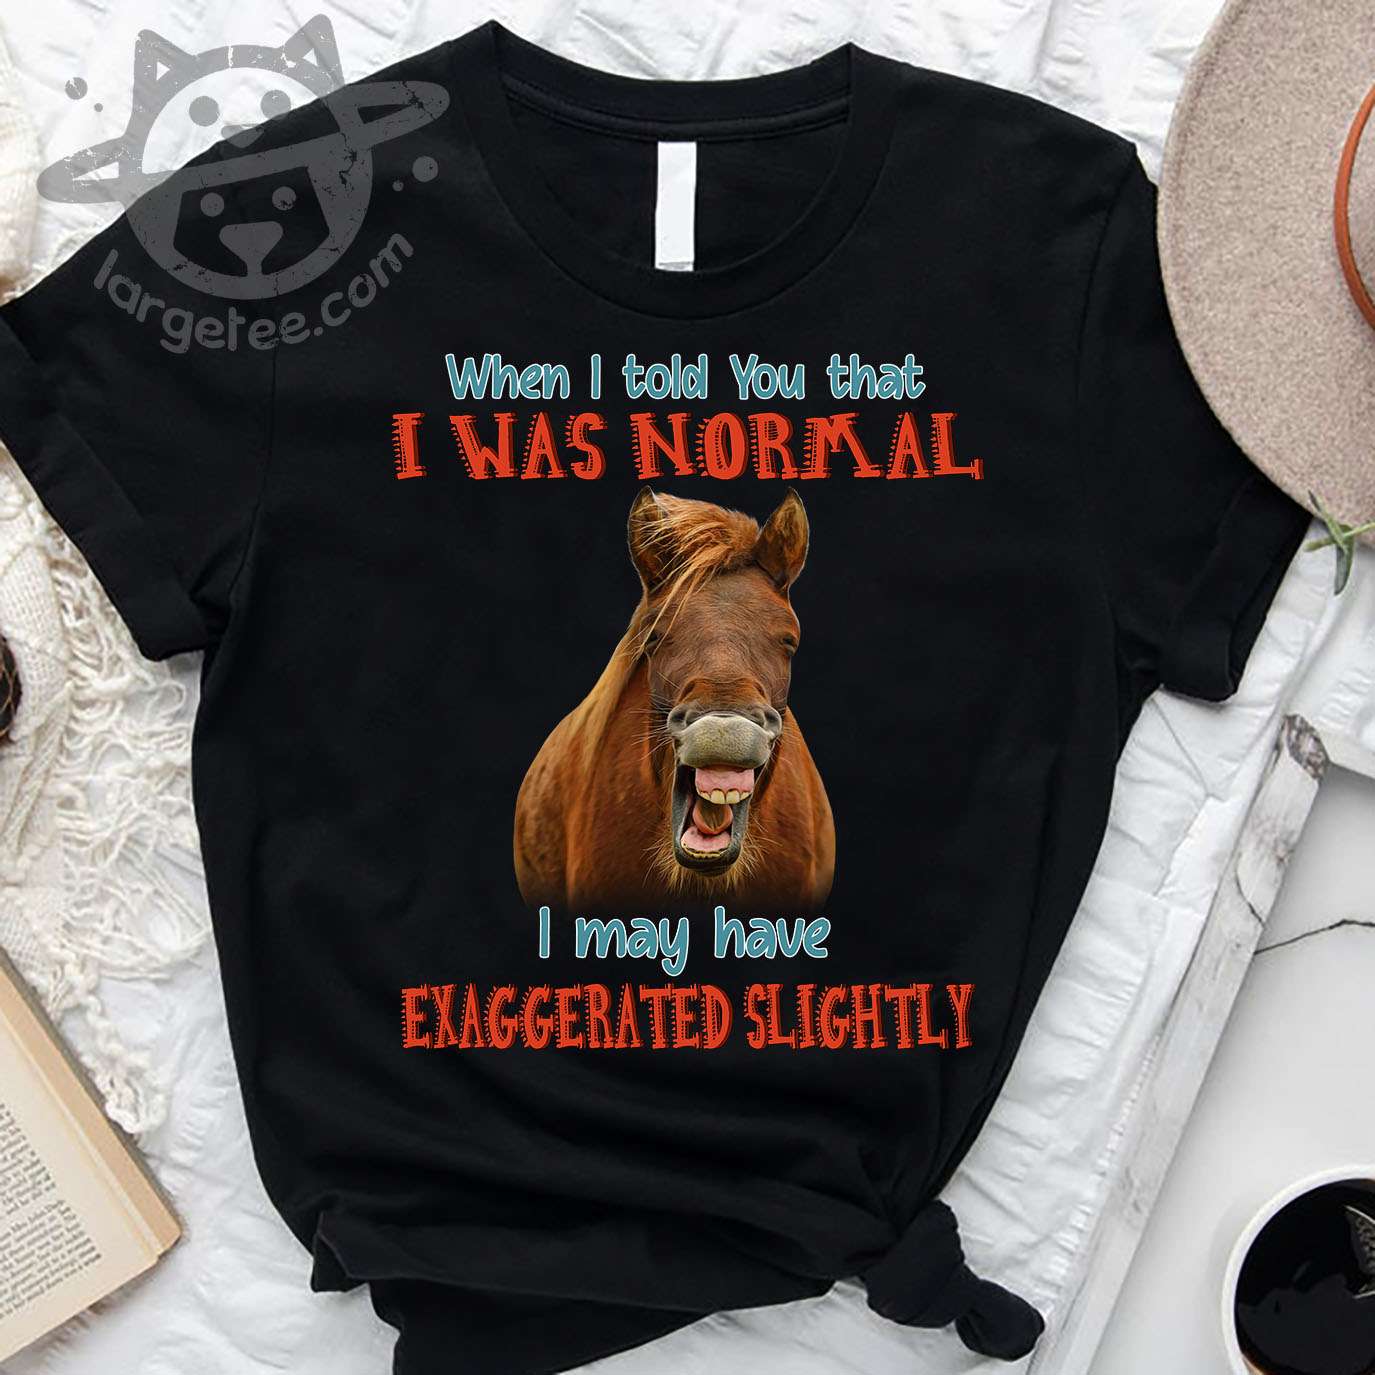 When I told you that I was normal I may have exaggerated slightly - Laughing horse